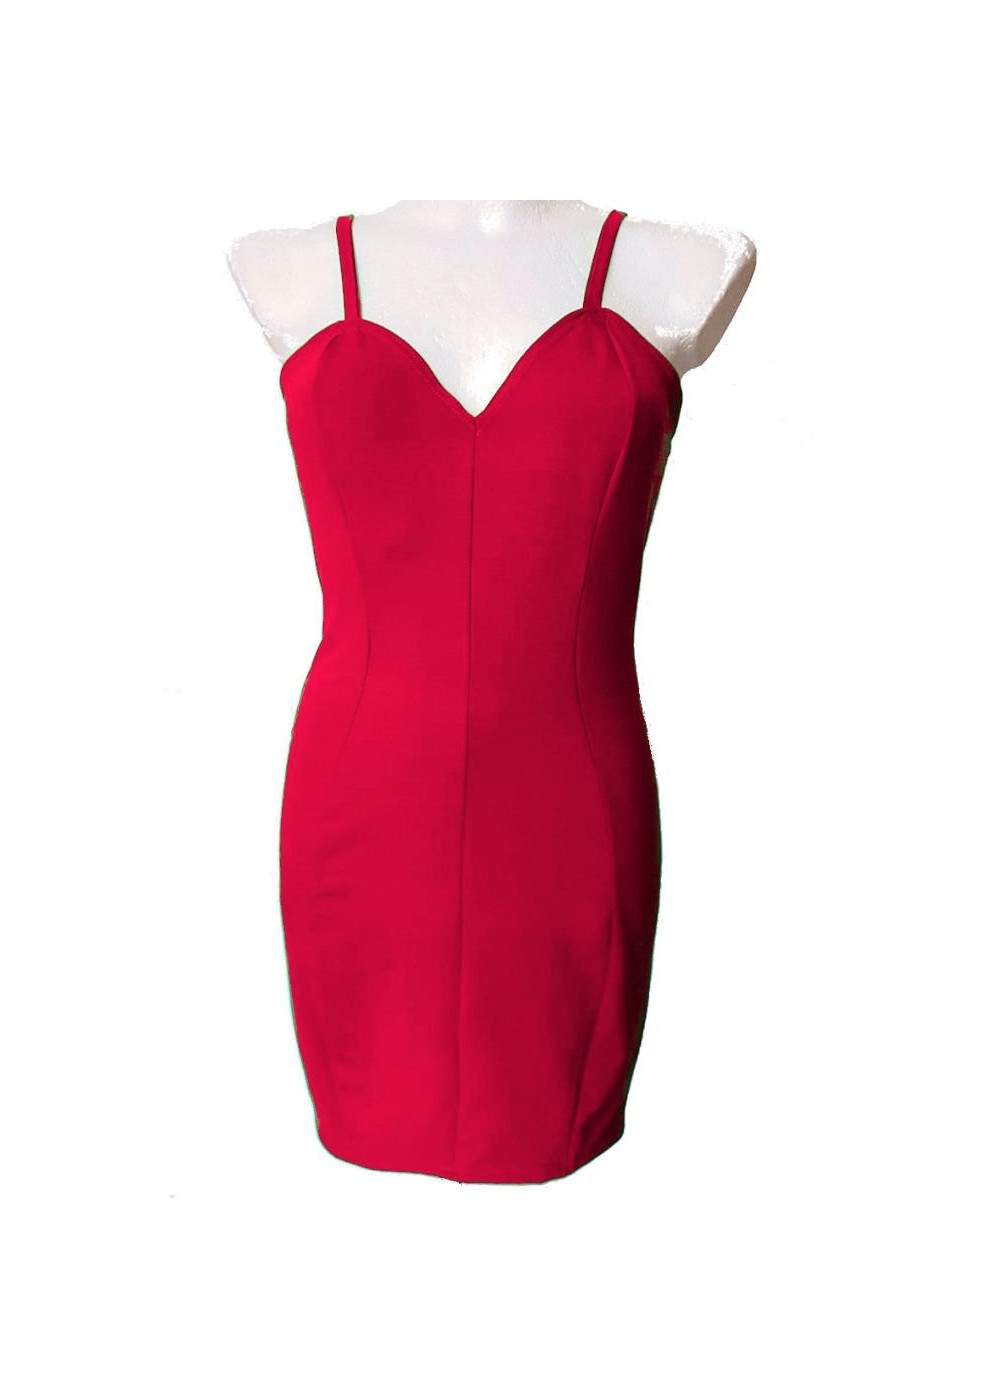 Red Stretch Cotton Strap Dress CockPart Dress Size 34 - 52 - 